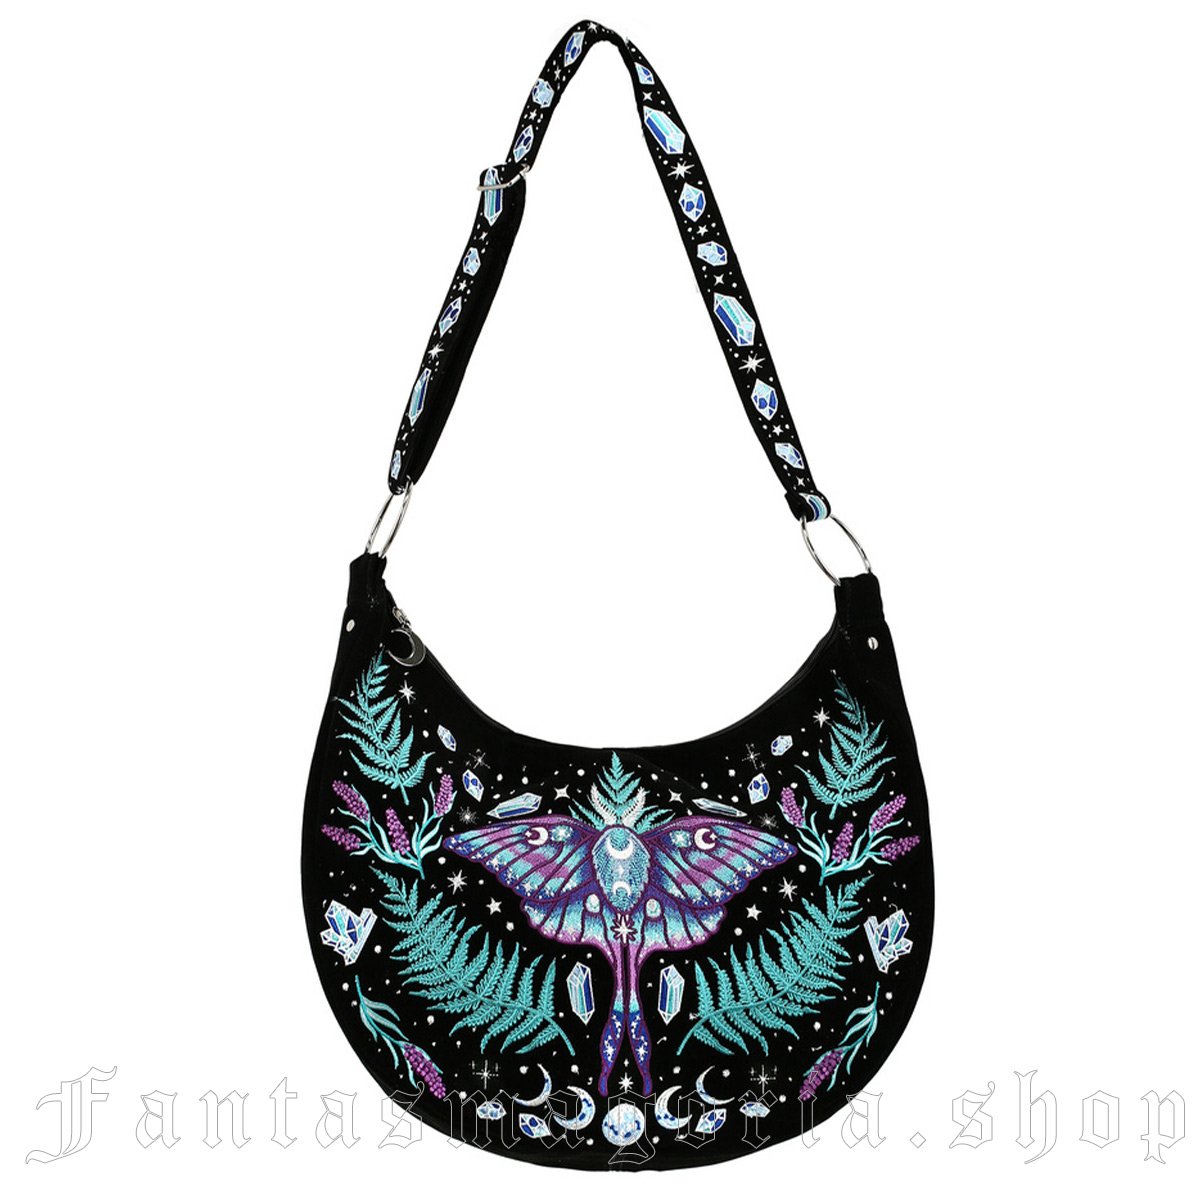 Gothic black slouchy embroidered shoulder bag. - Restyle - RES5900949919515